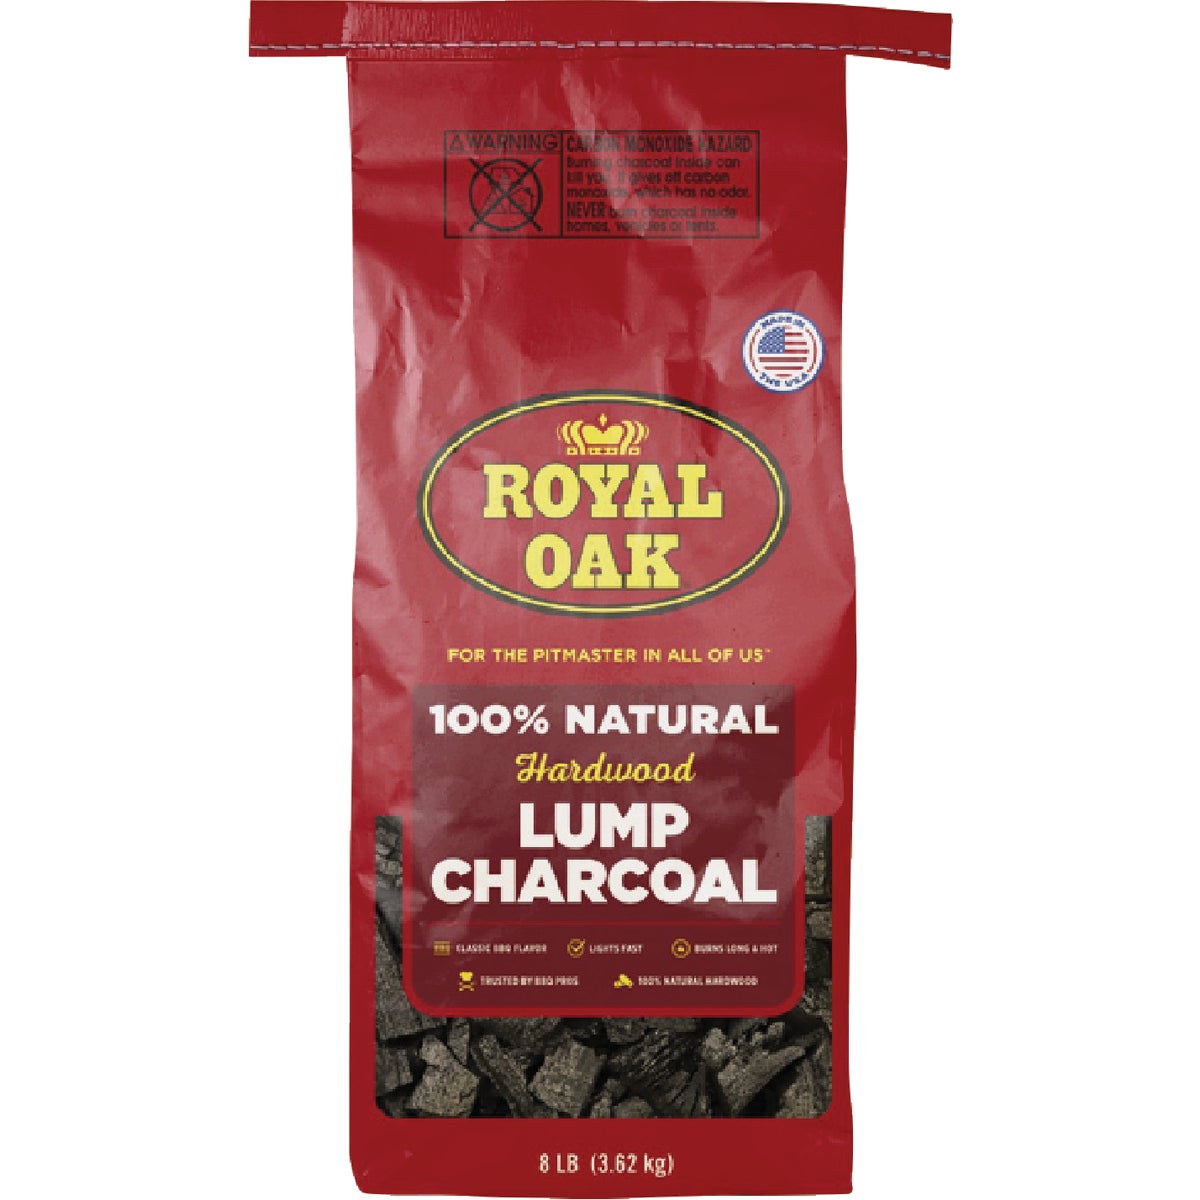 Item 809233, 100% hardwood lump charcoal from Royal Oak lights easily and burns clean